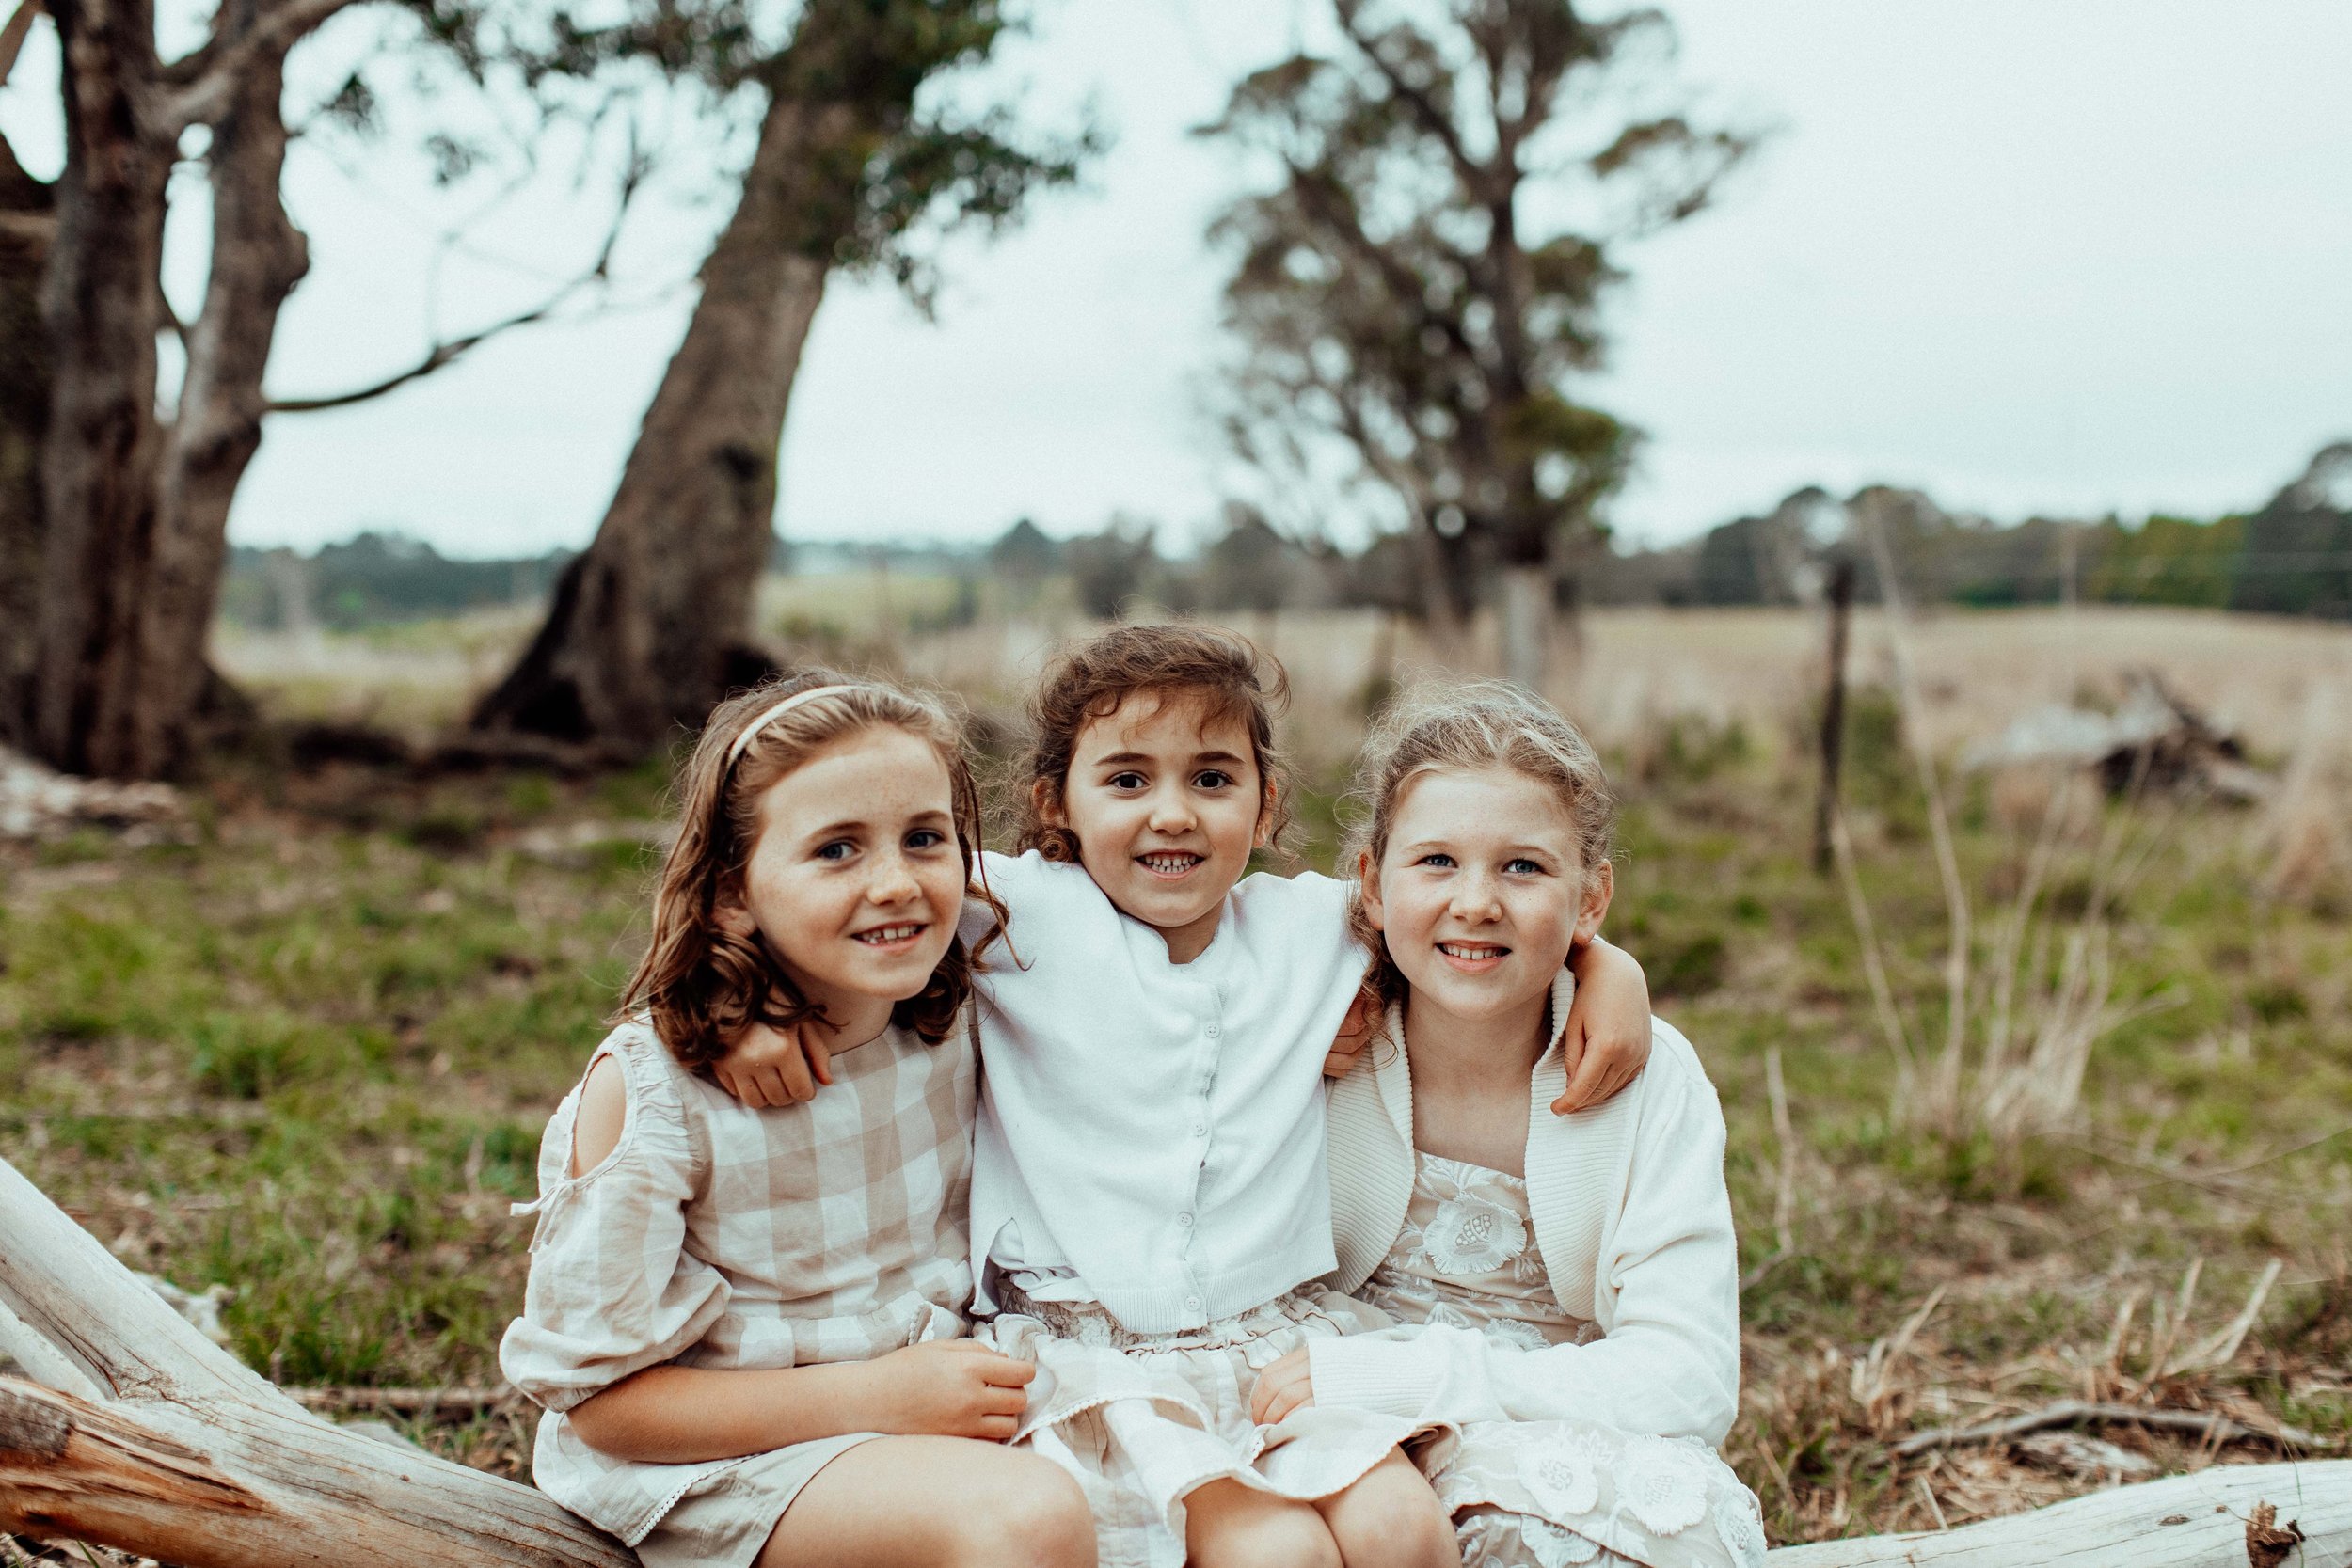 exeter-family-session-southern-highlands-family-photgraphy-carroll-family-farm-66.jpg